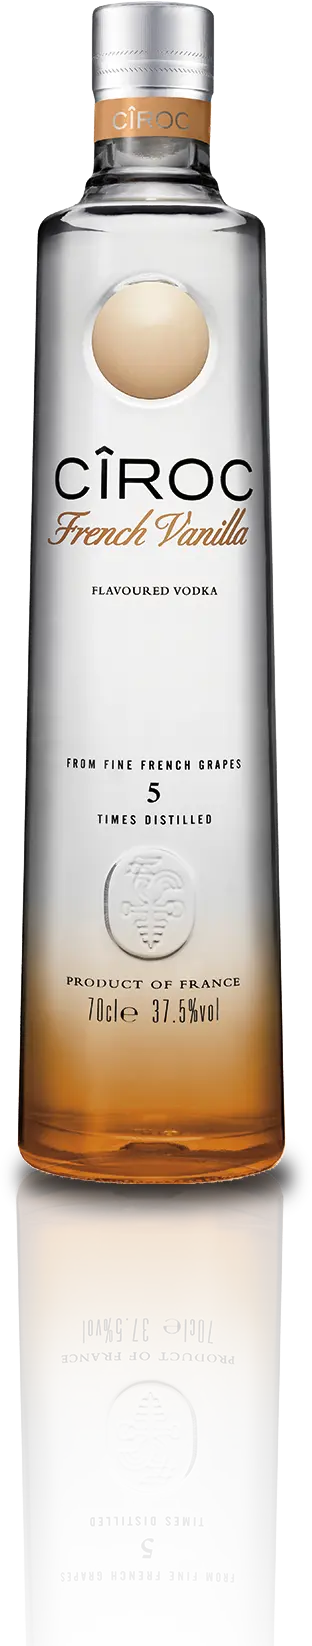 Ciroc French Vanilla(Made with Vodka Infused with Natural Flavors)